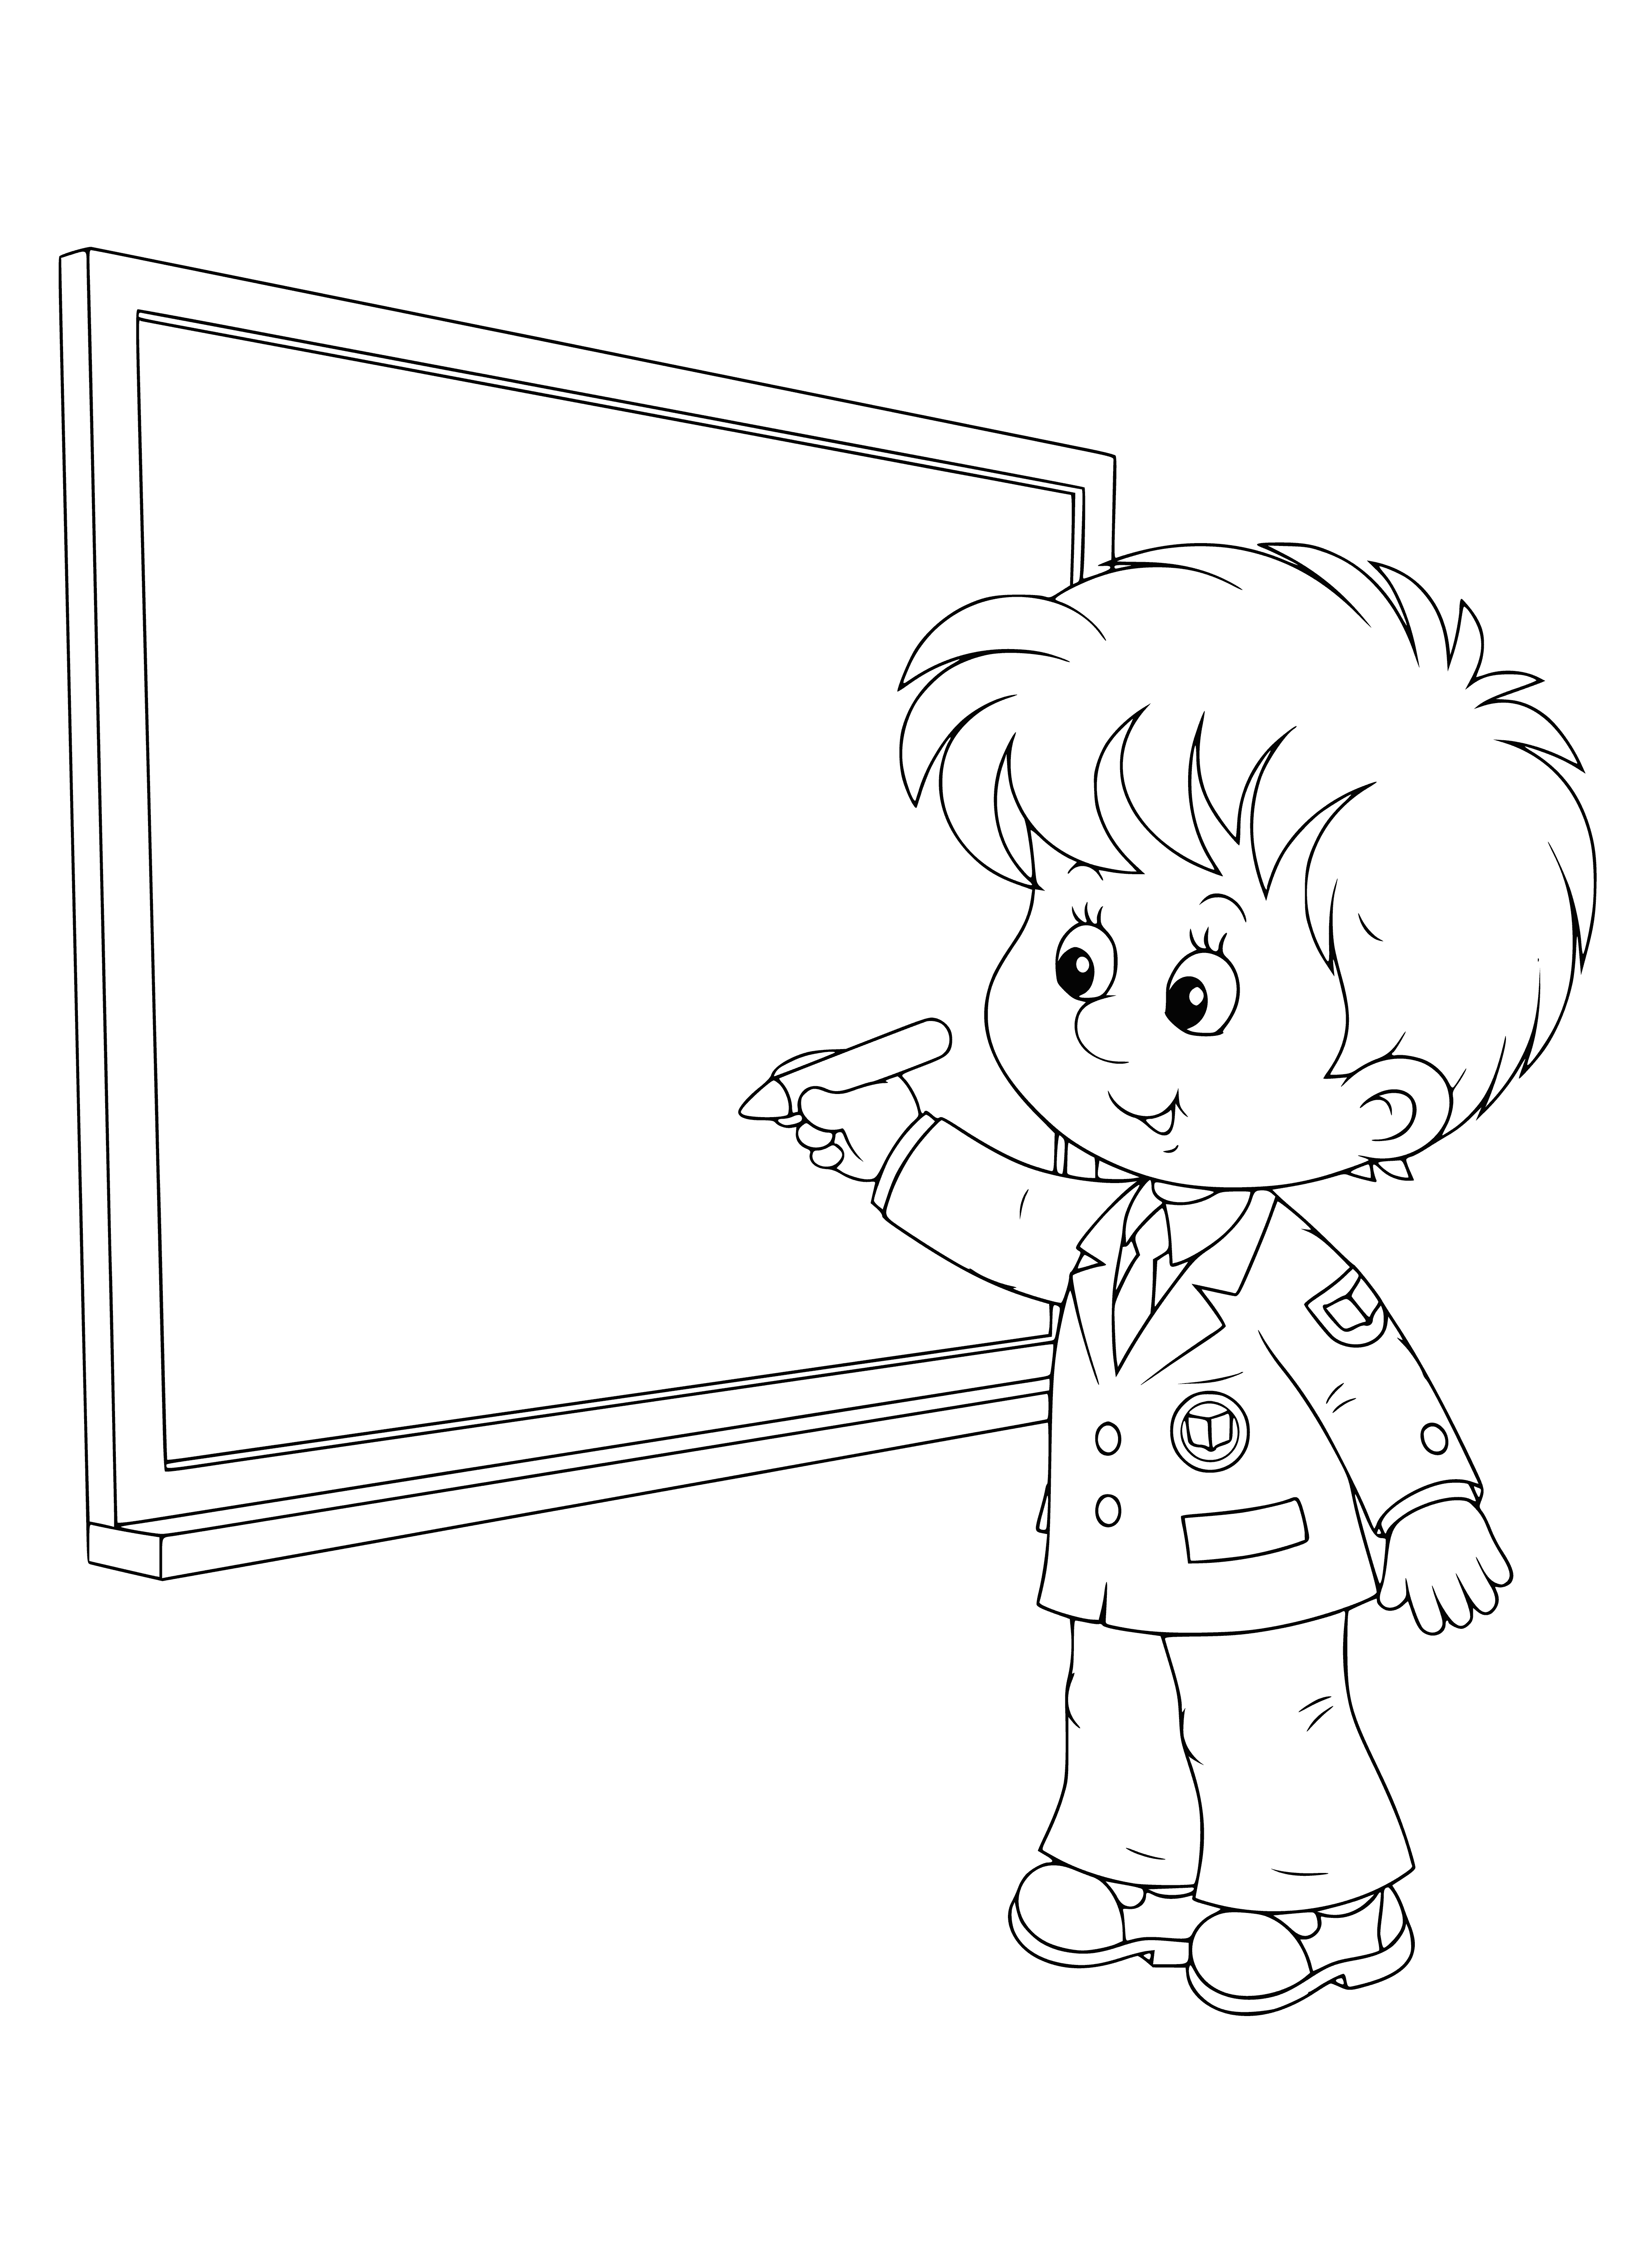 The boy answers at the blackboard coloring page